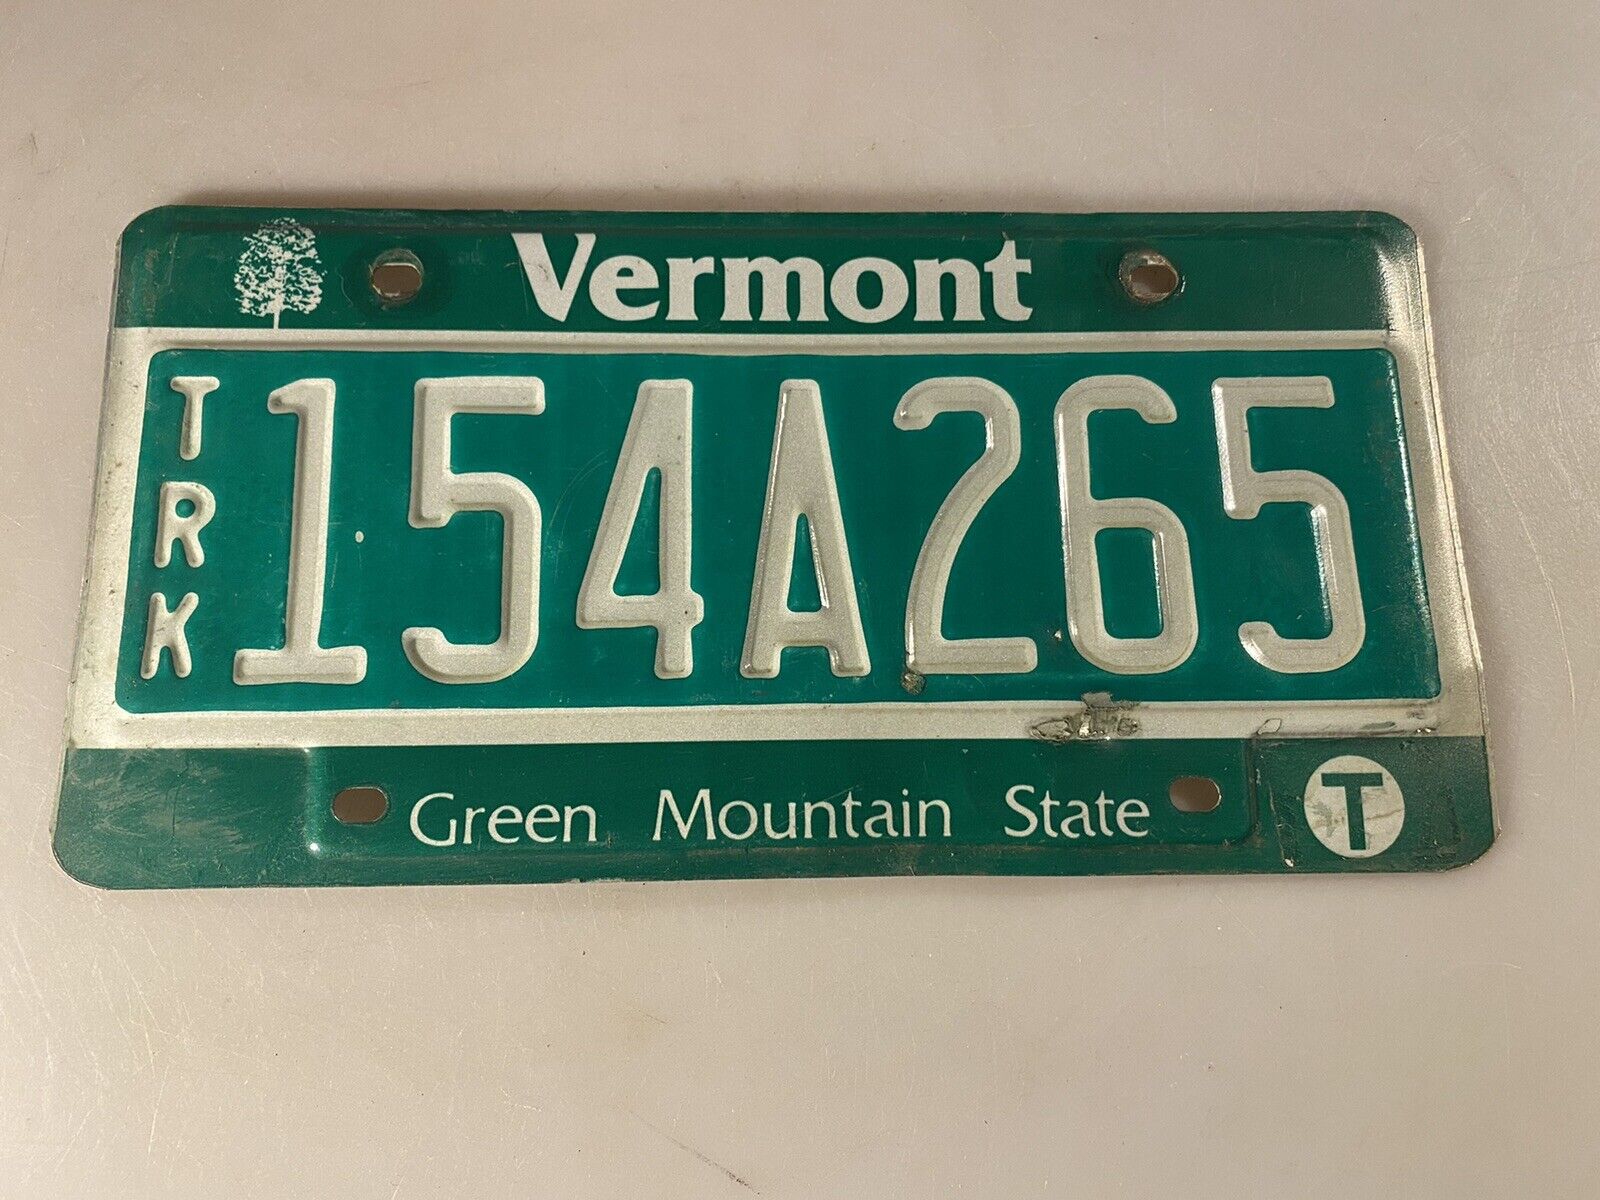 Vintage Vermont “green Mountain State” Truck License Plate 154a265